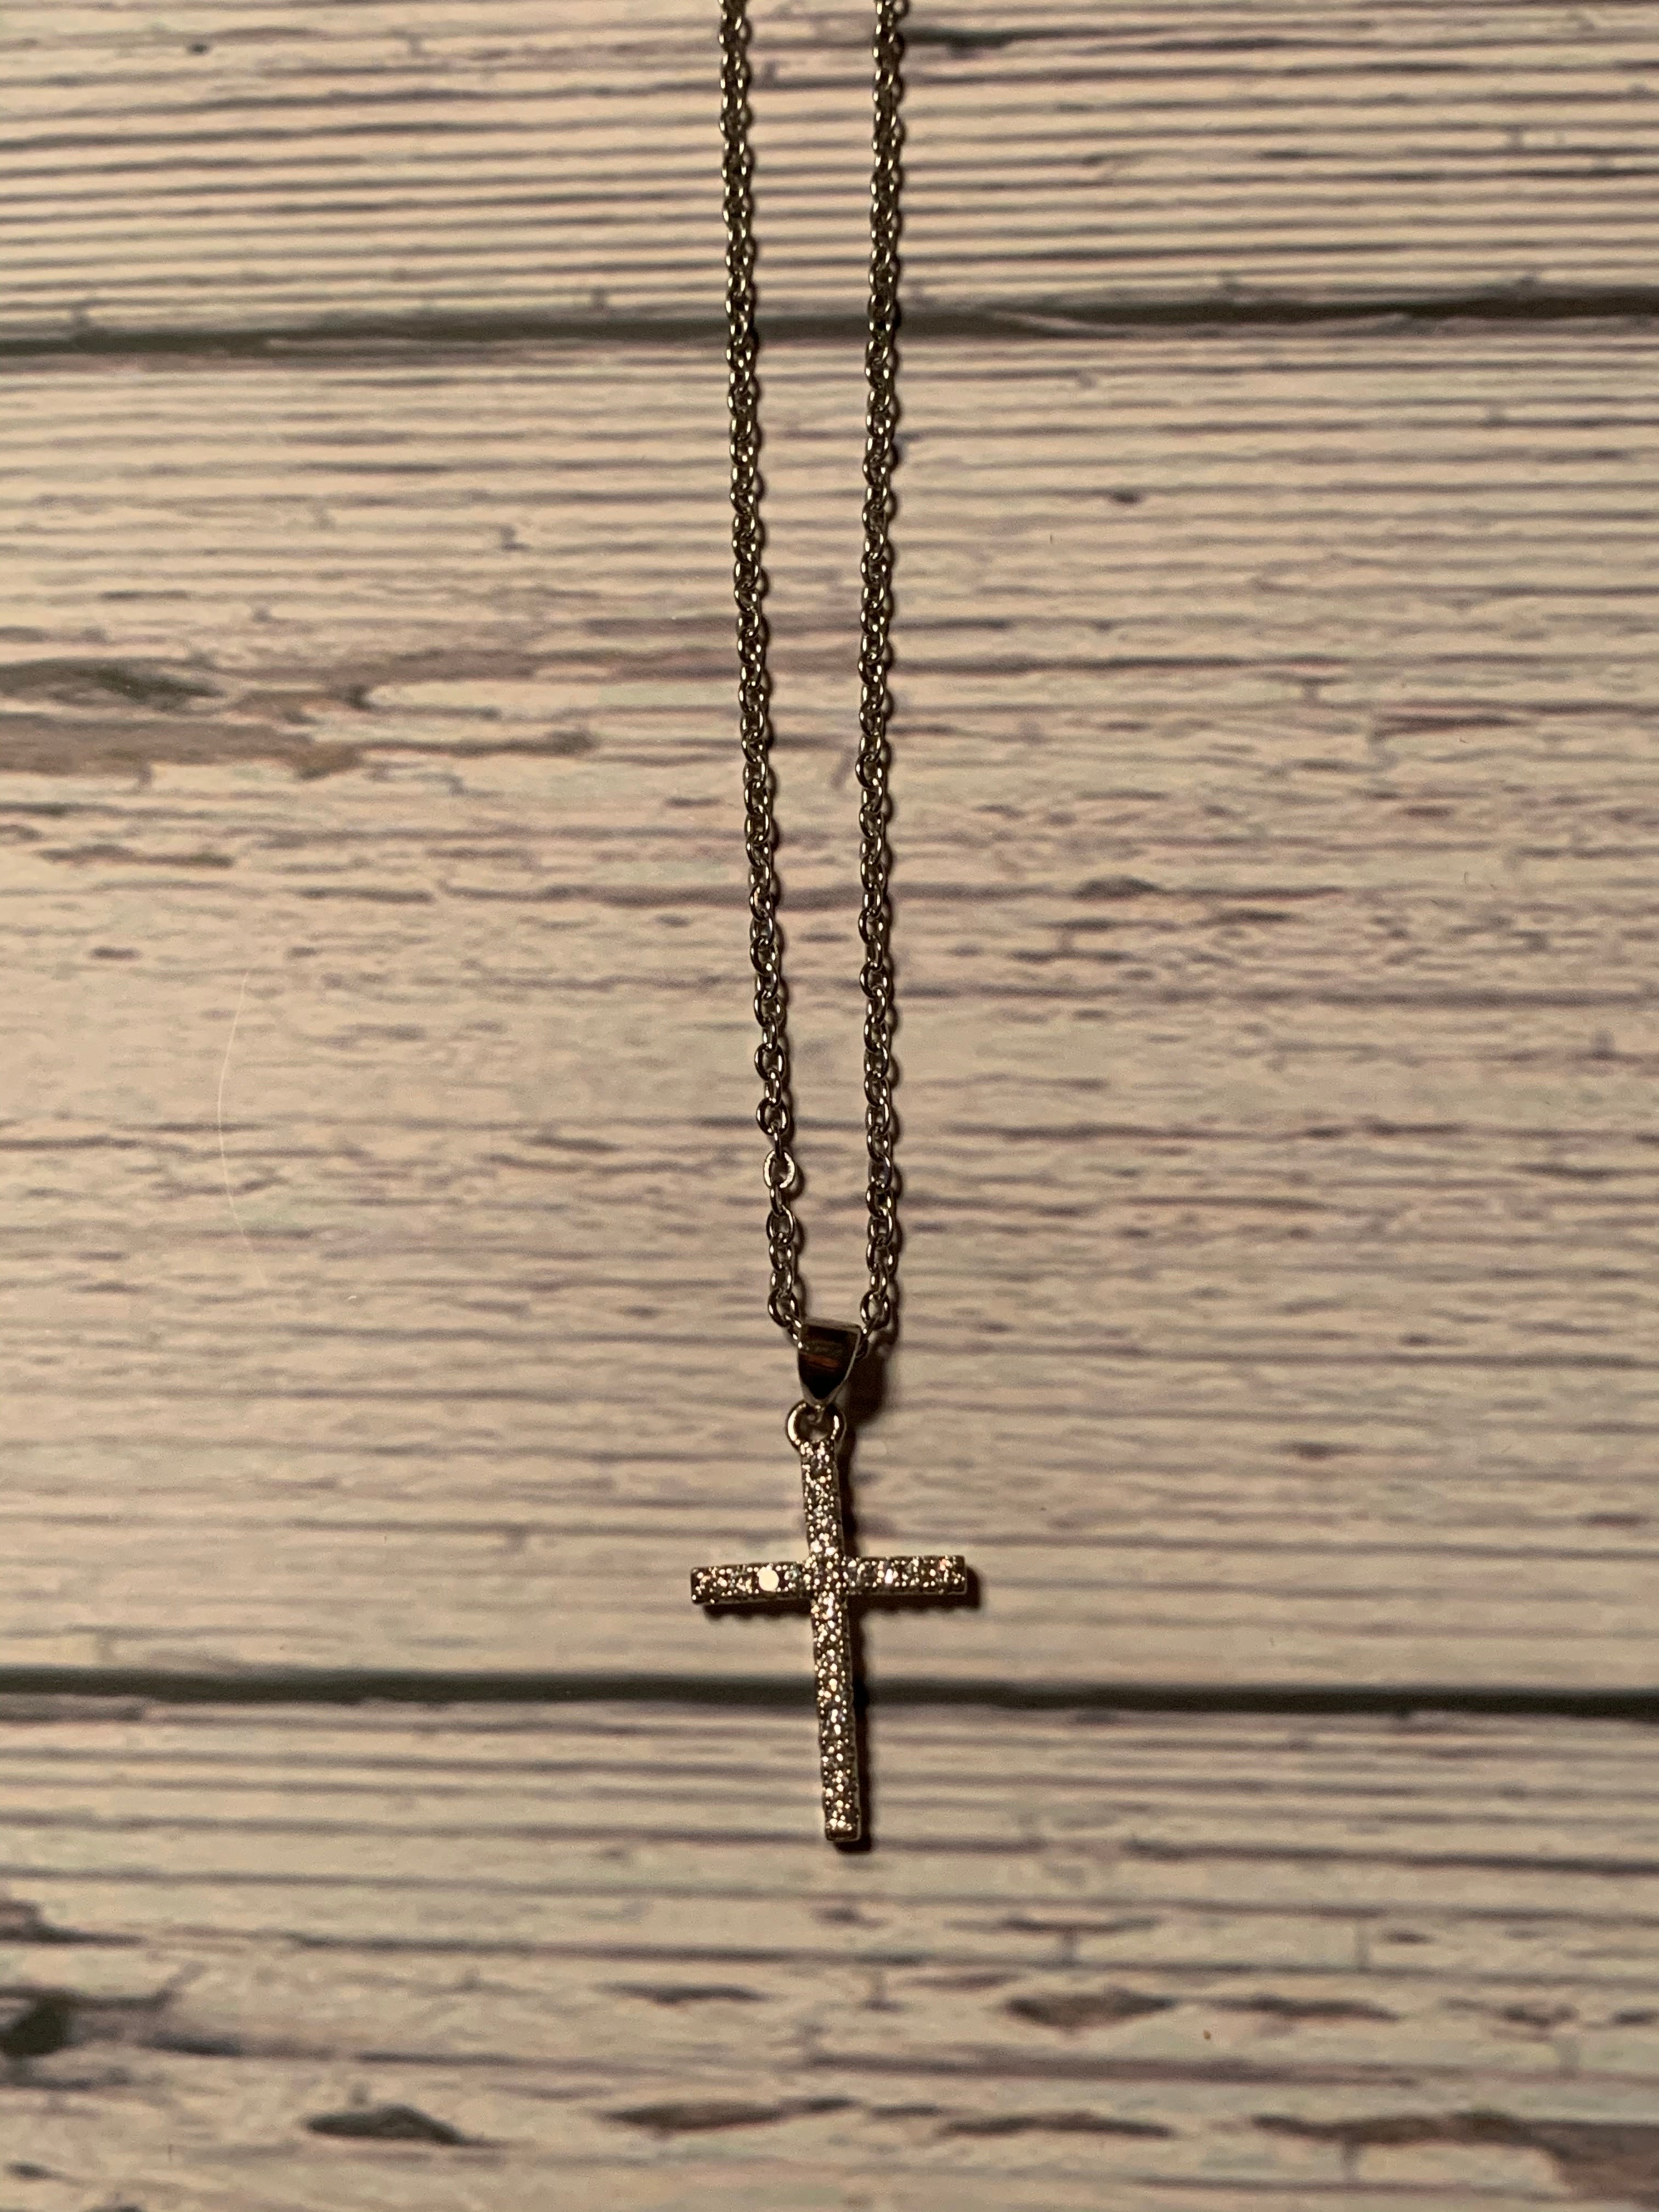 Silver Cross Crystal Necklace